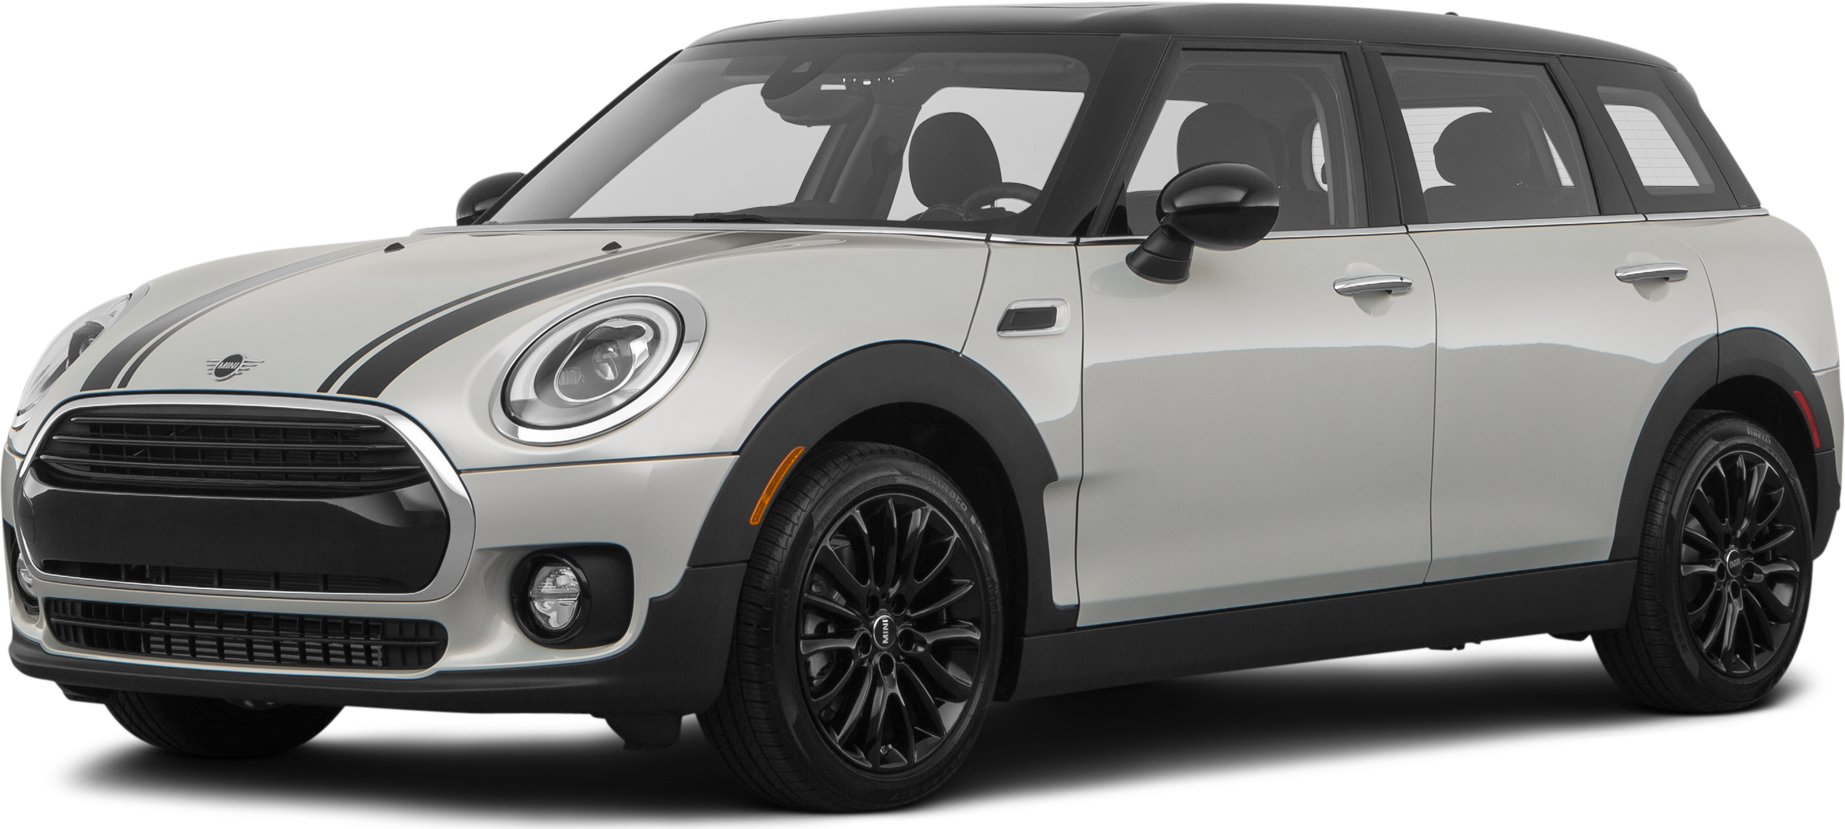 https://file.kelleybluebookimages.com/kbb/base/evox/CP/12890/2019-MINI-Clubman-front_12890_032_1845x829_A62_cropped.png